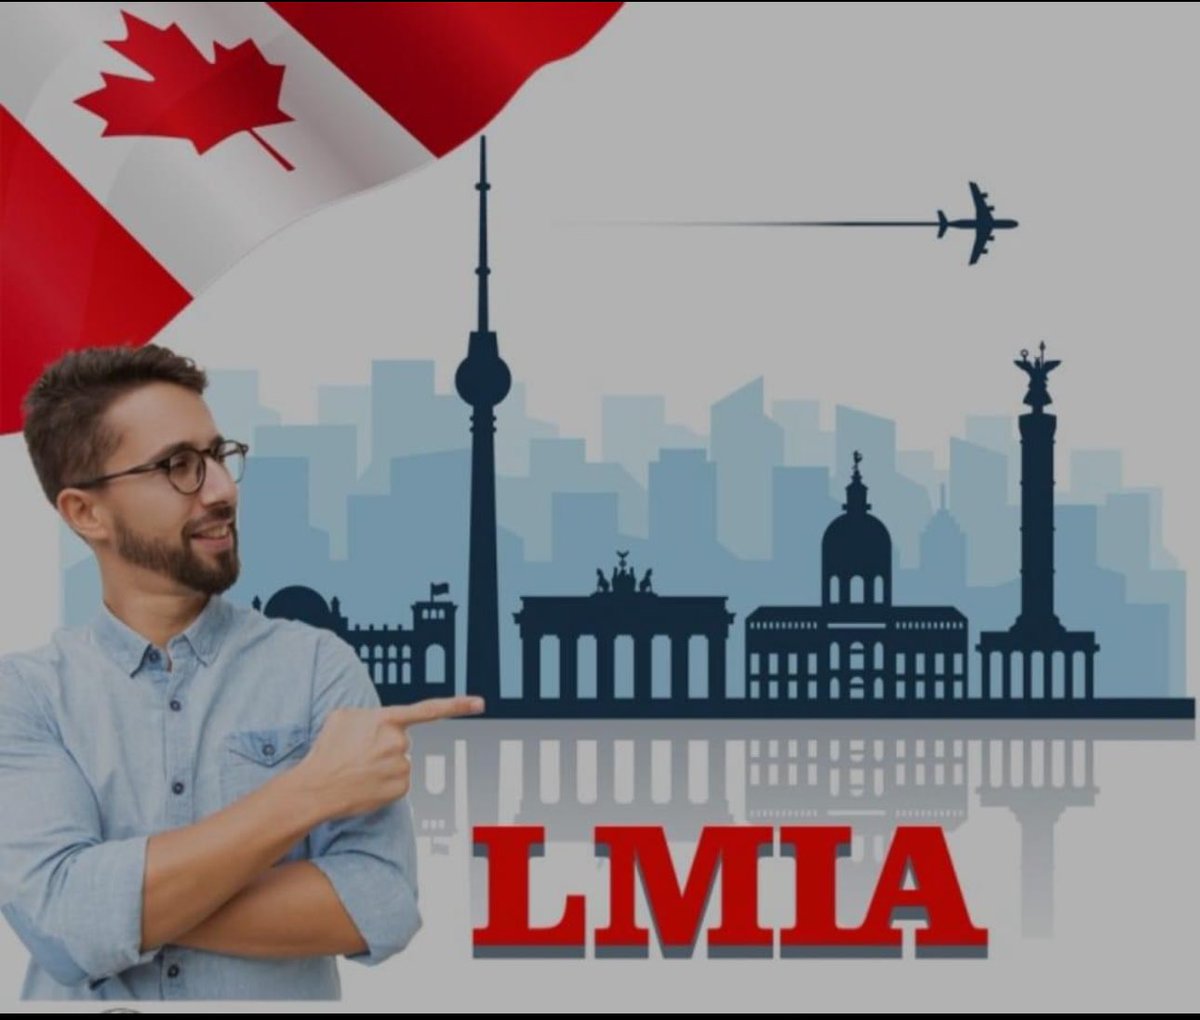 Work permit was never so easy to obtain in Canada
#canadianimmigration #canadavisa #canada #workpermit #LMIA #fyp